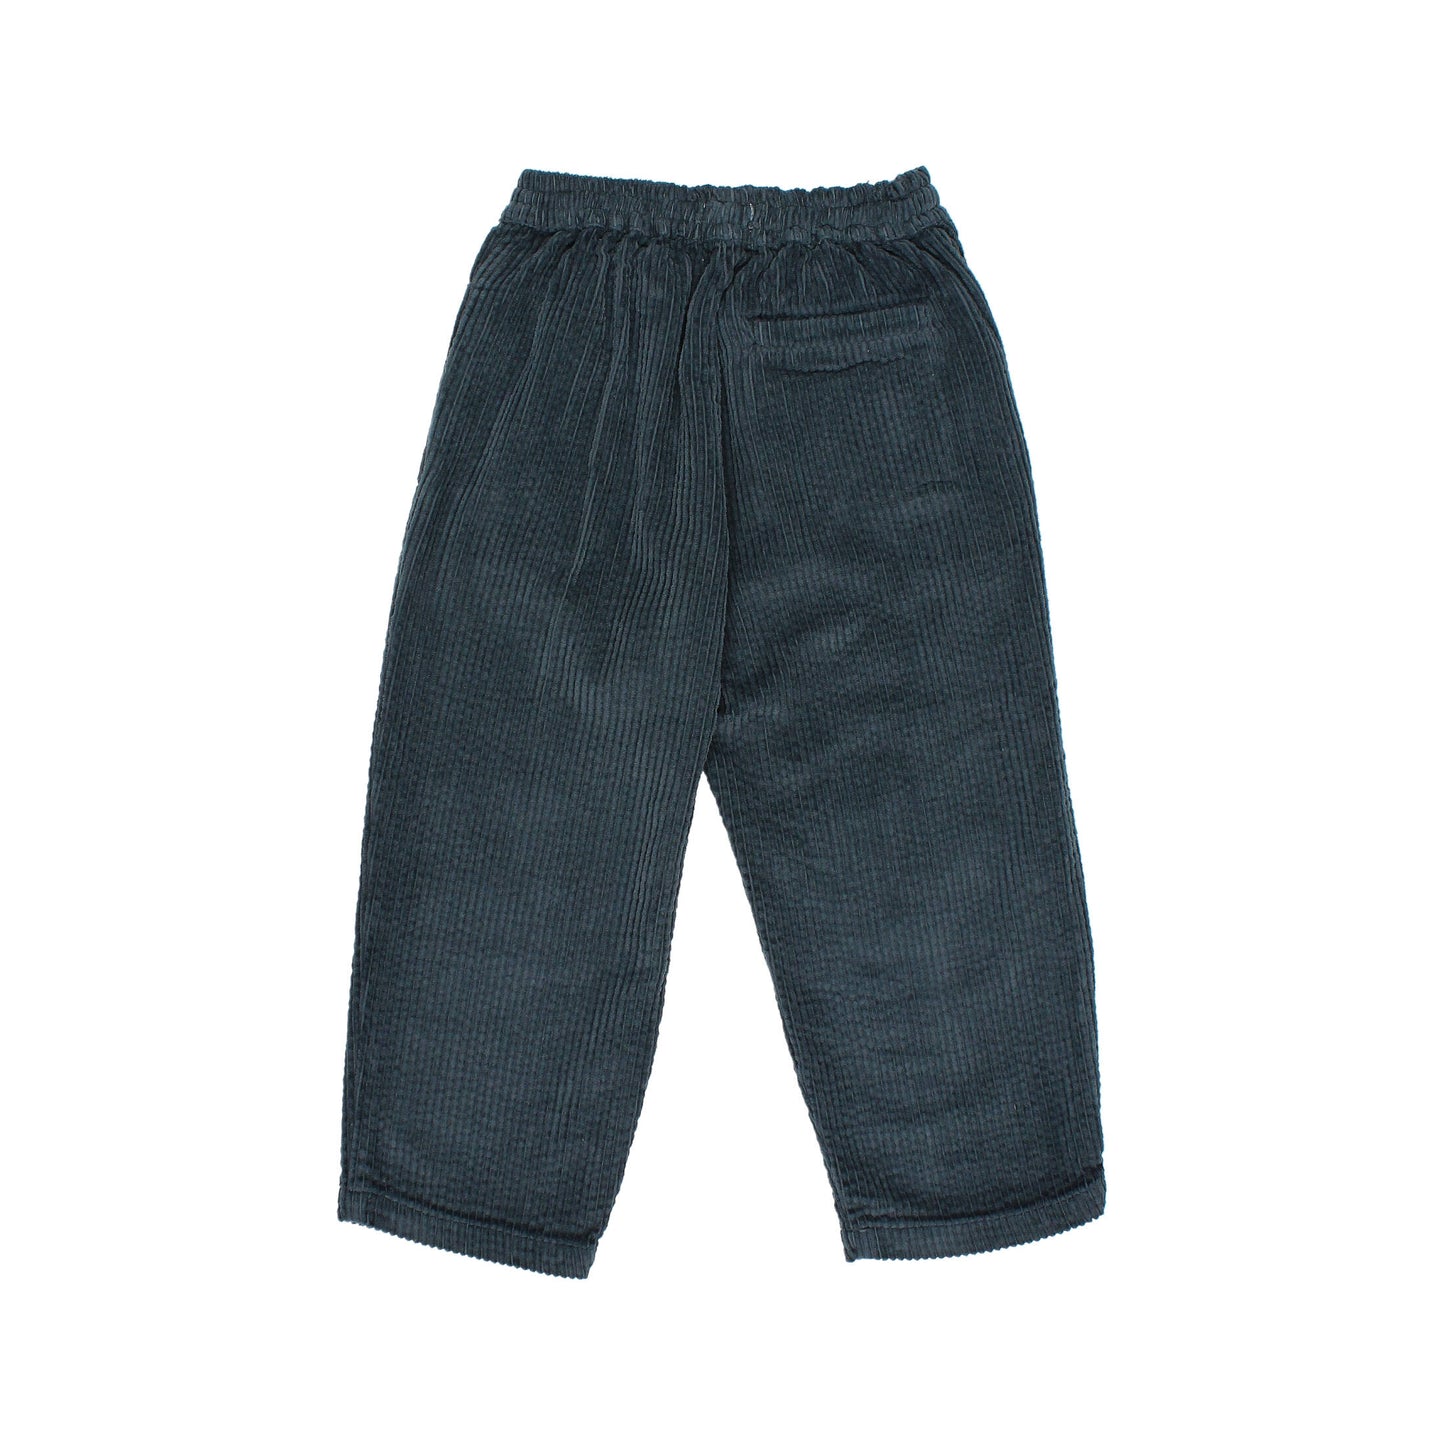 PANTS VELLUTO DEEP FOREST